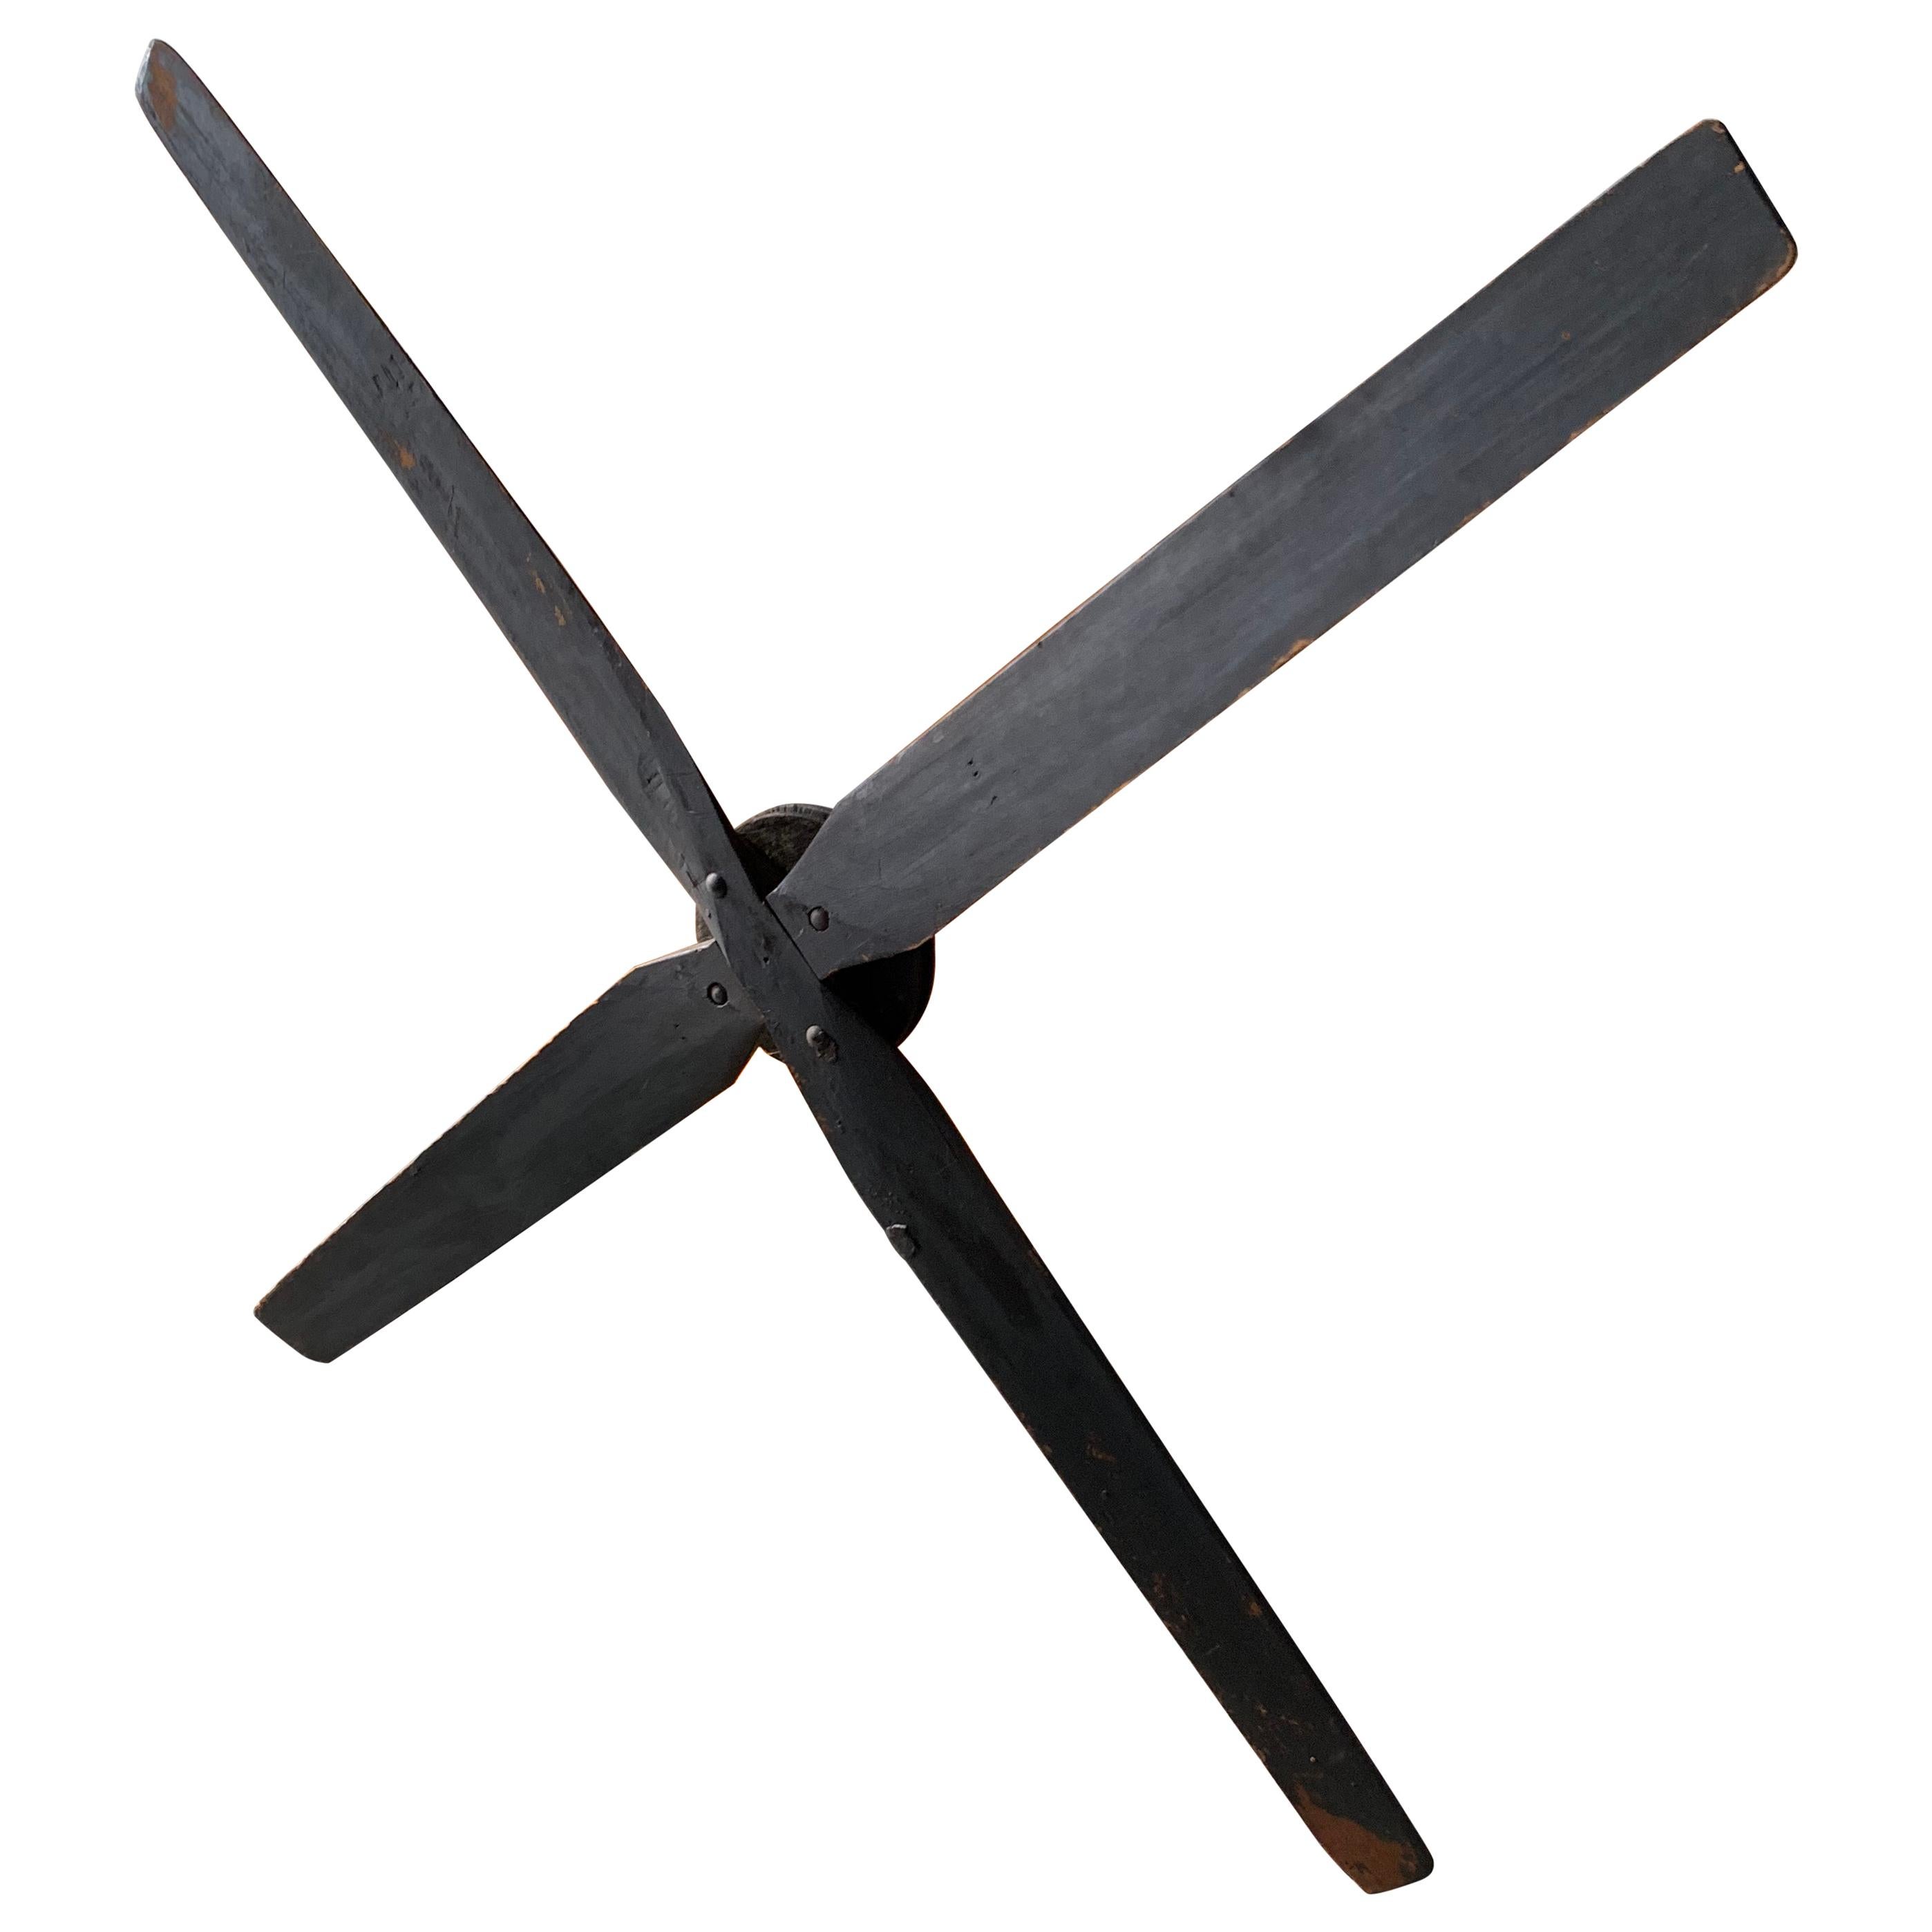 What is an industrial fan used for?